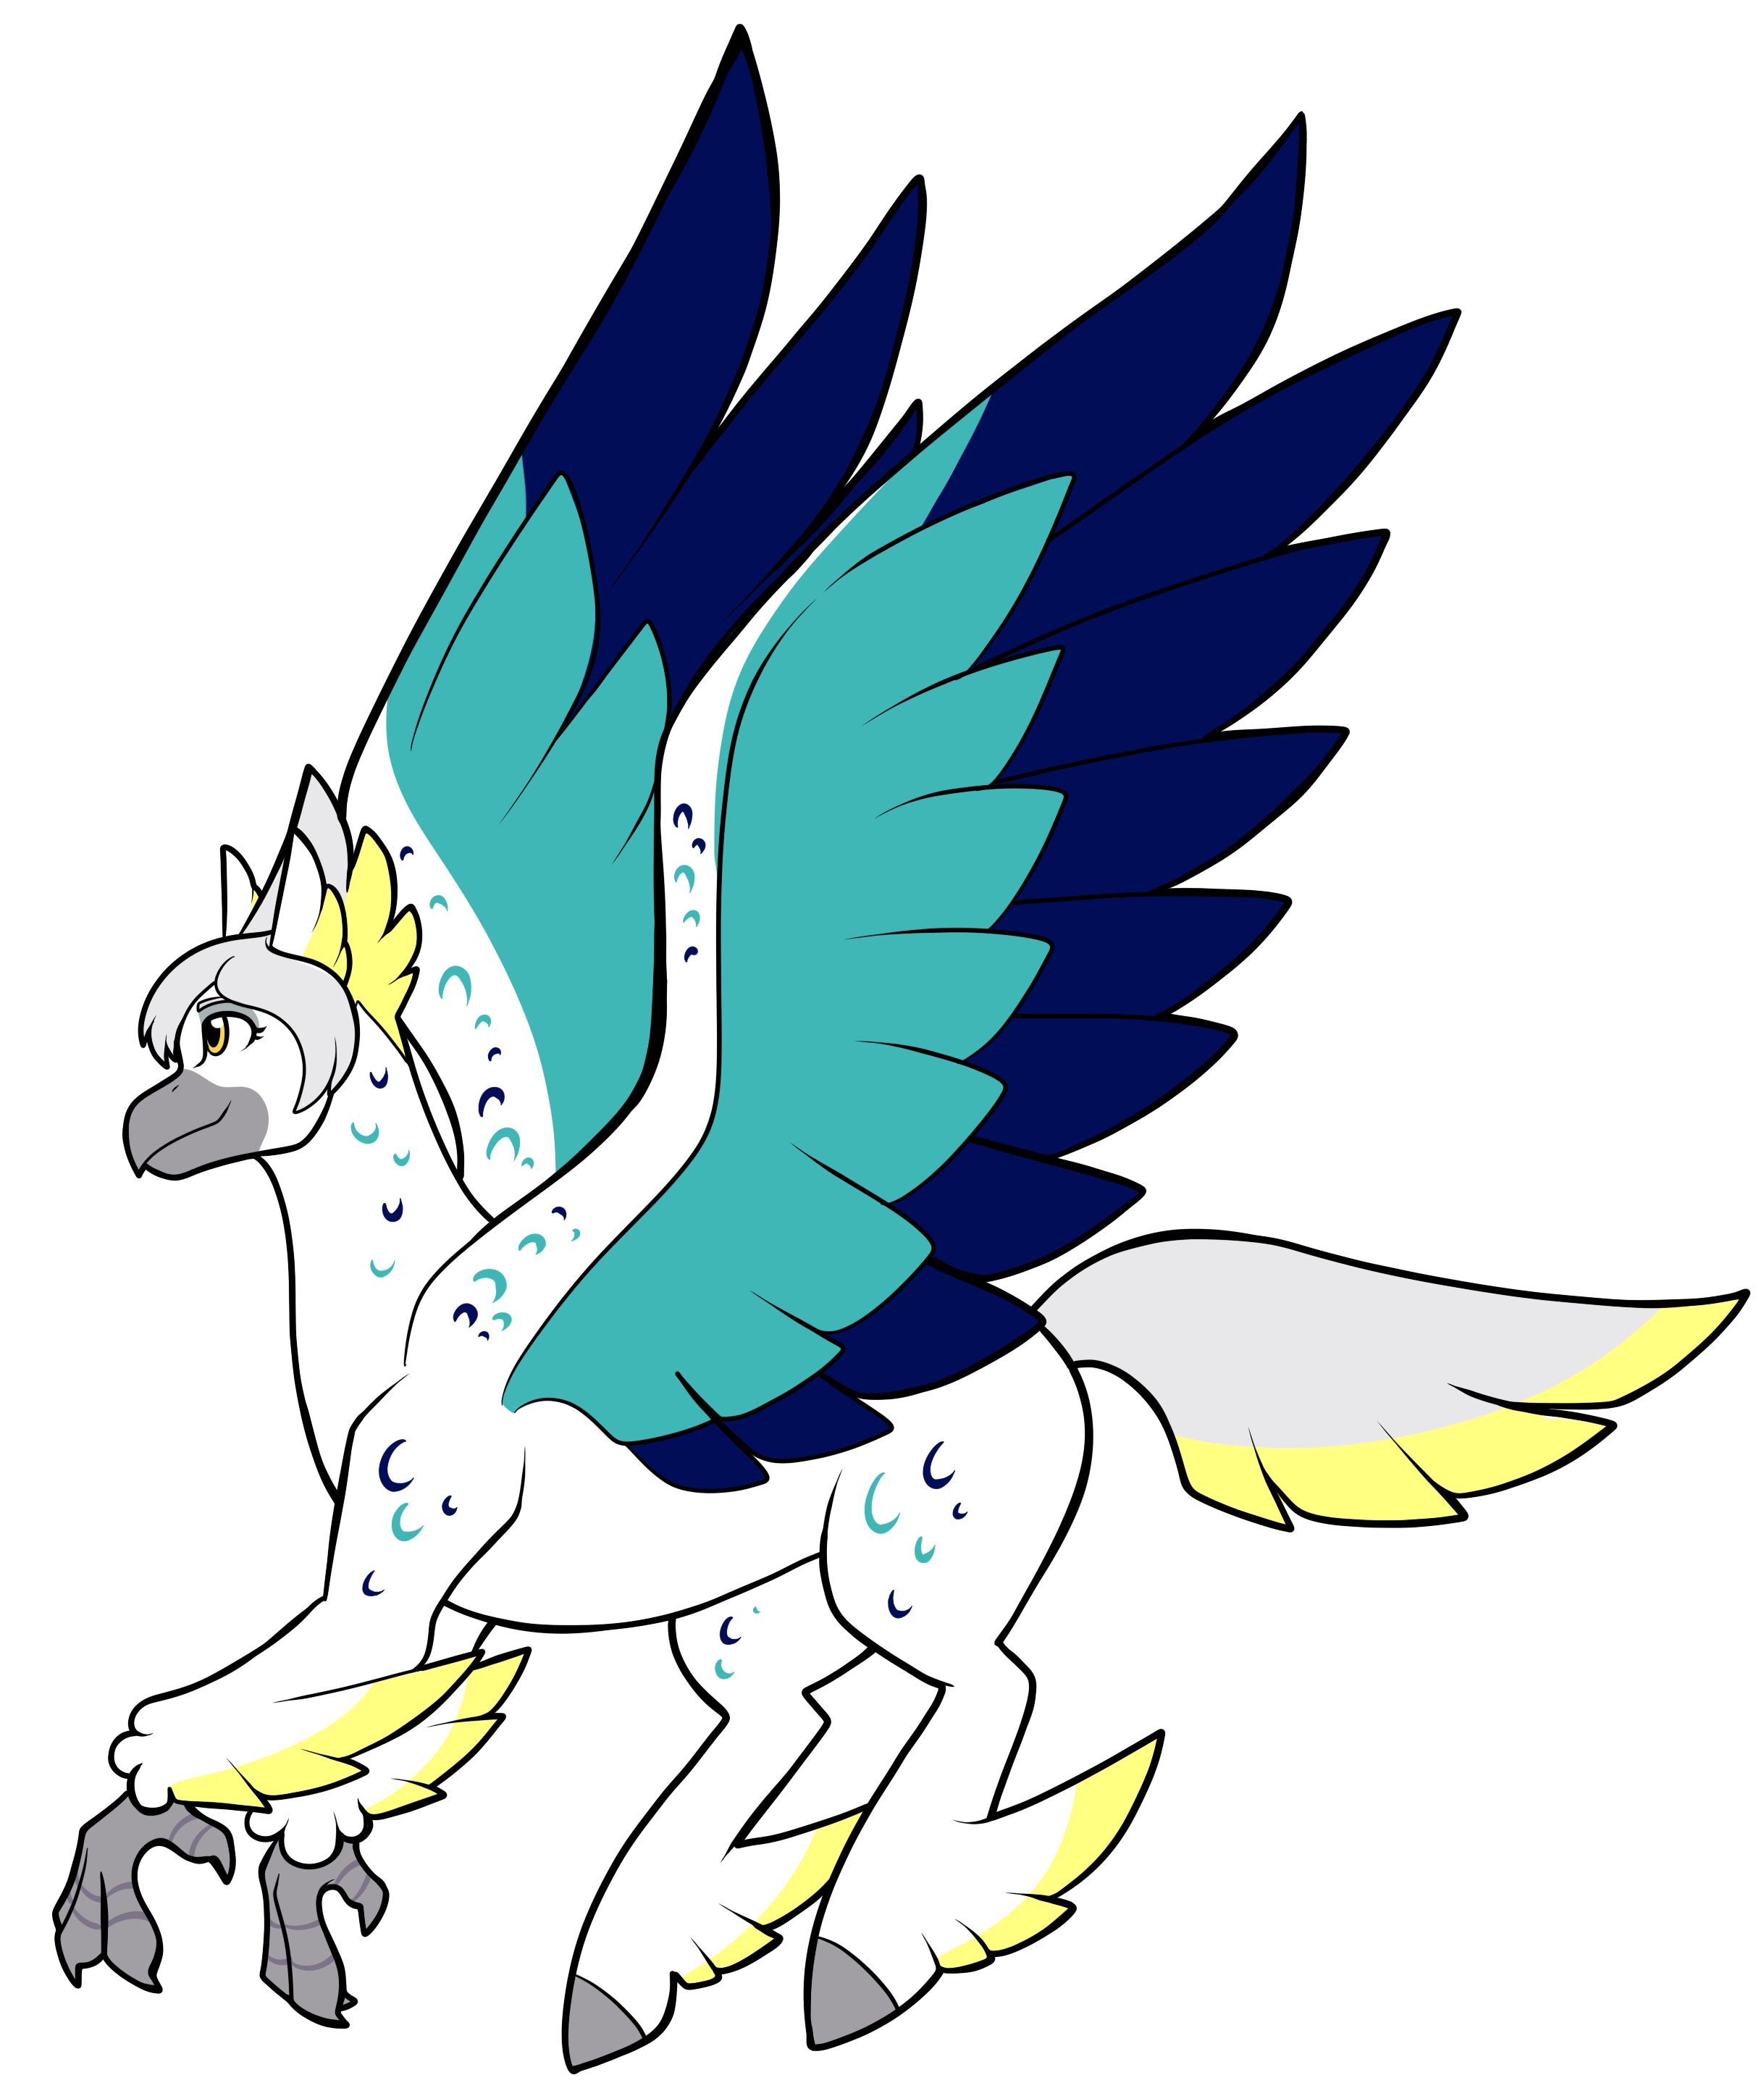 Hippogriff AU: Alina Golda as a Hippogriff